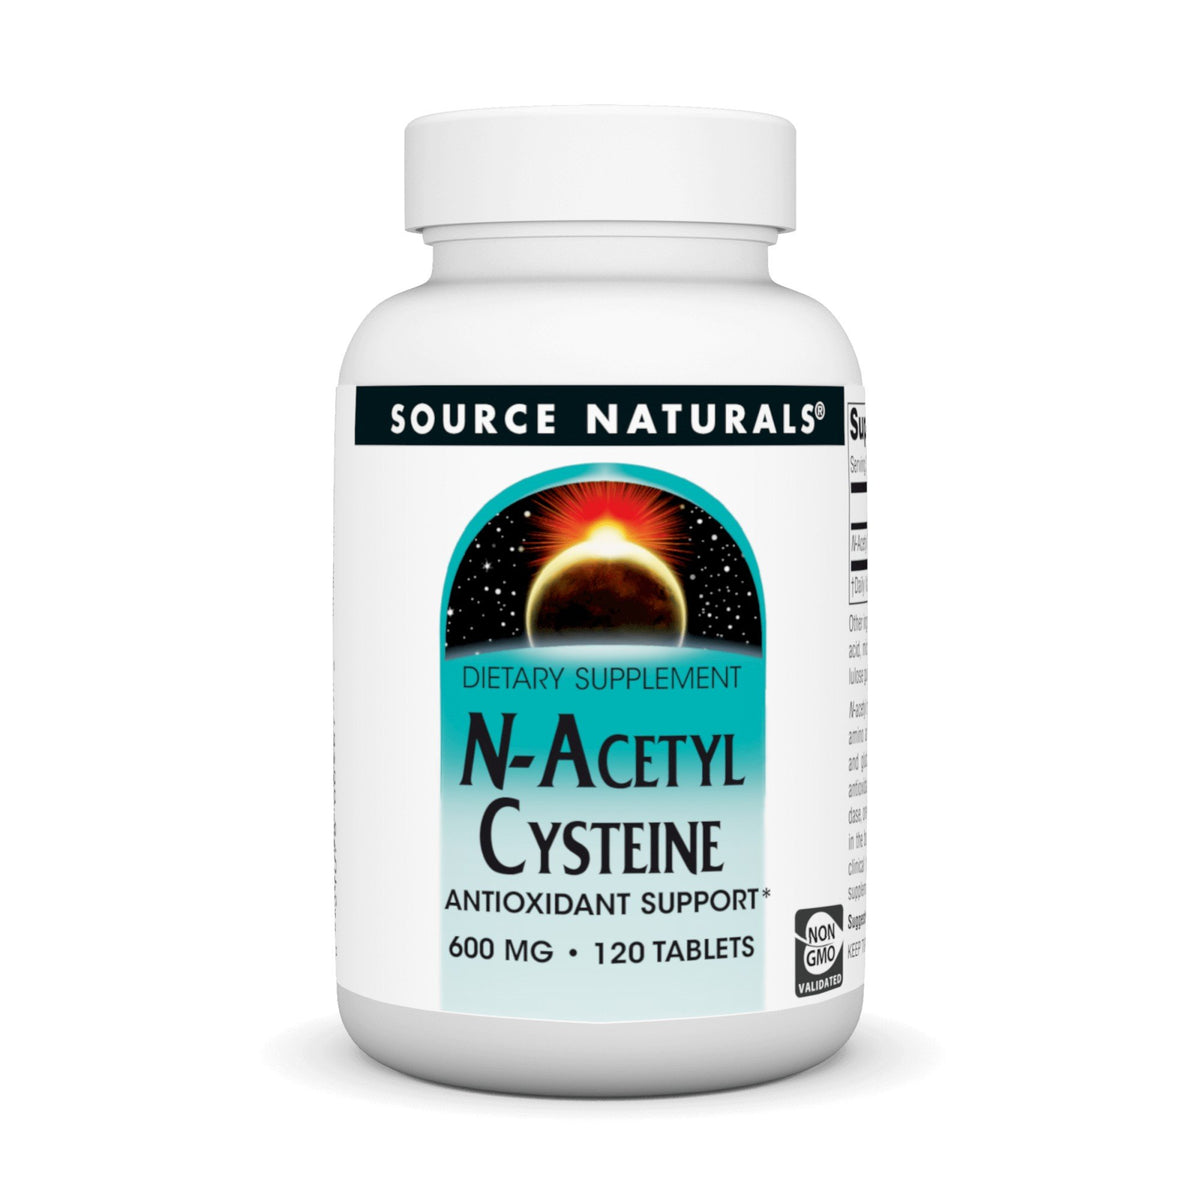 Source Naturals, Inc. N-Acetyl Cysteine 600mg 120 Tablet